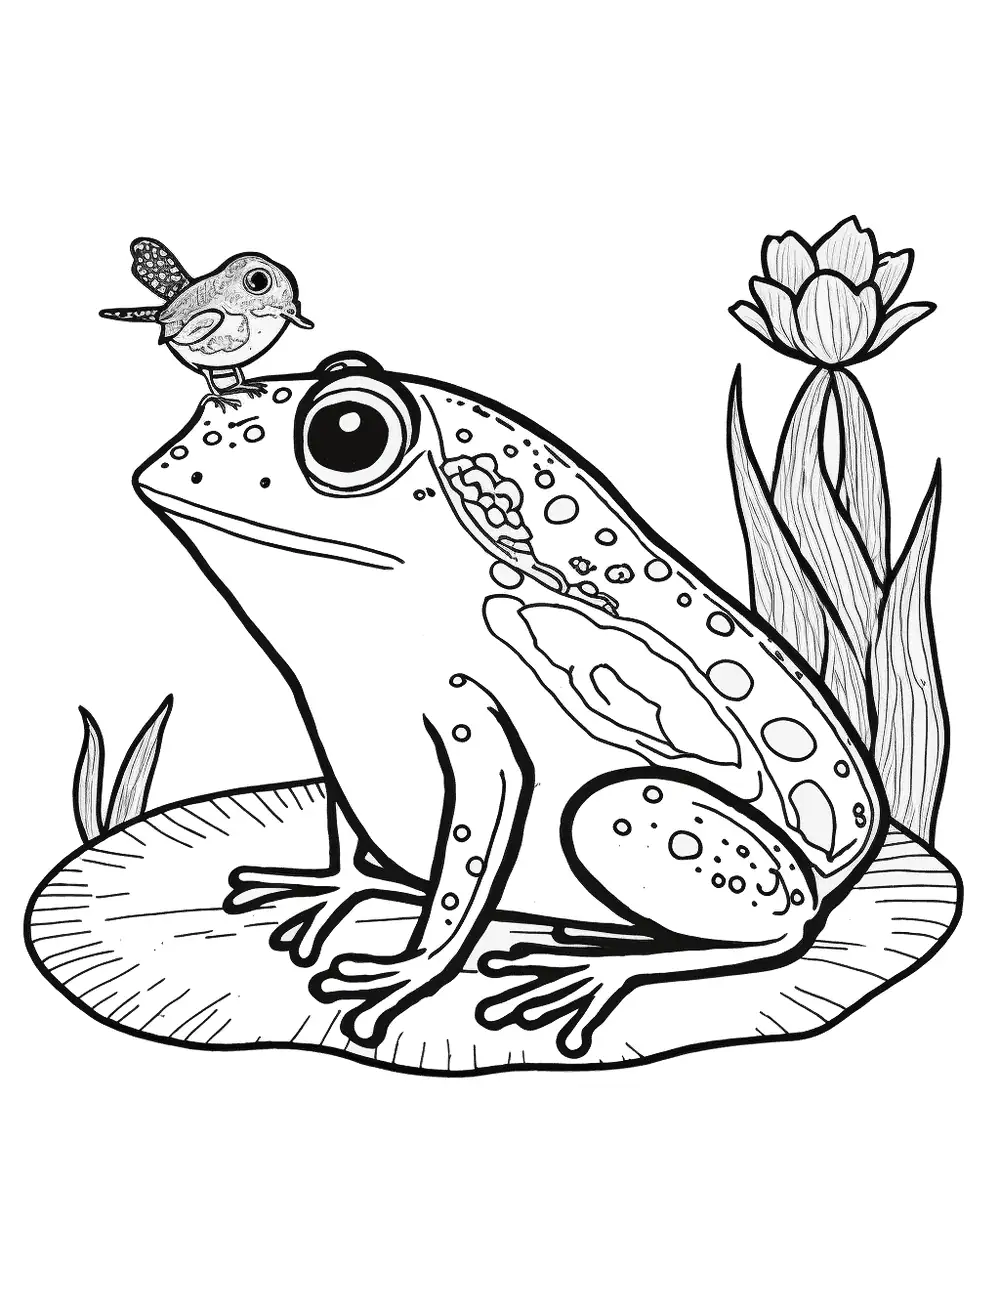 Frog And Bird Coloring Page - A frog and a bird, with the bird sitting on the frog's back